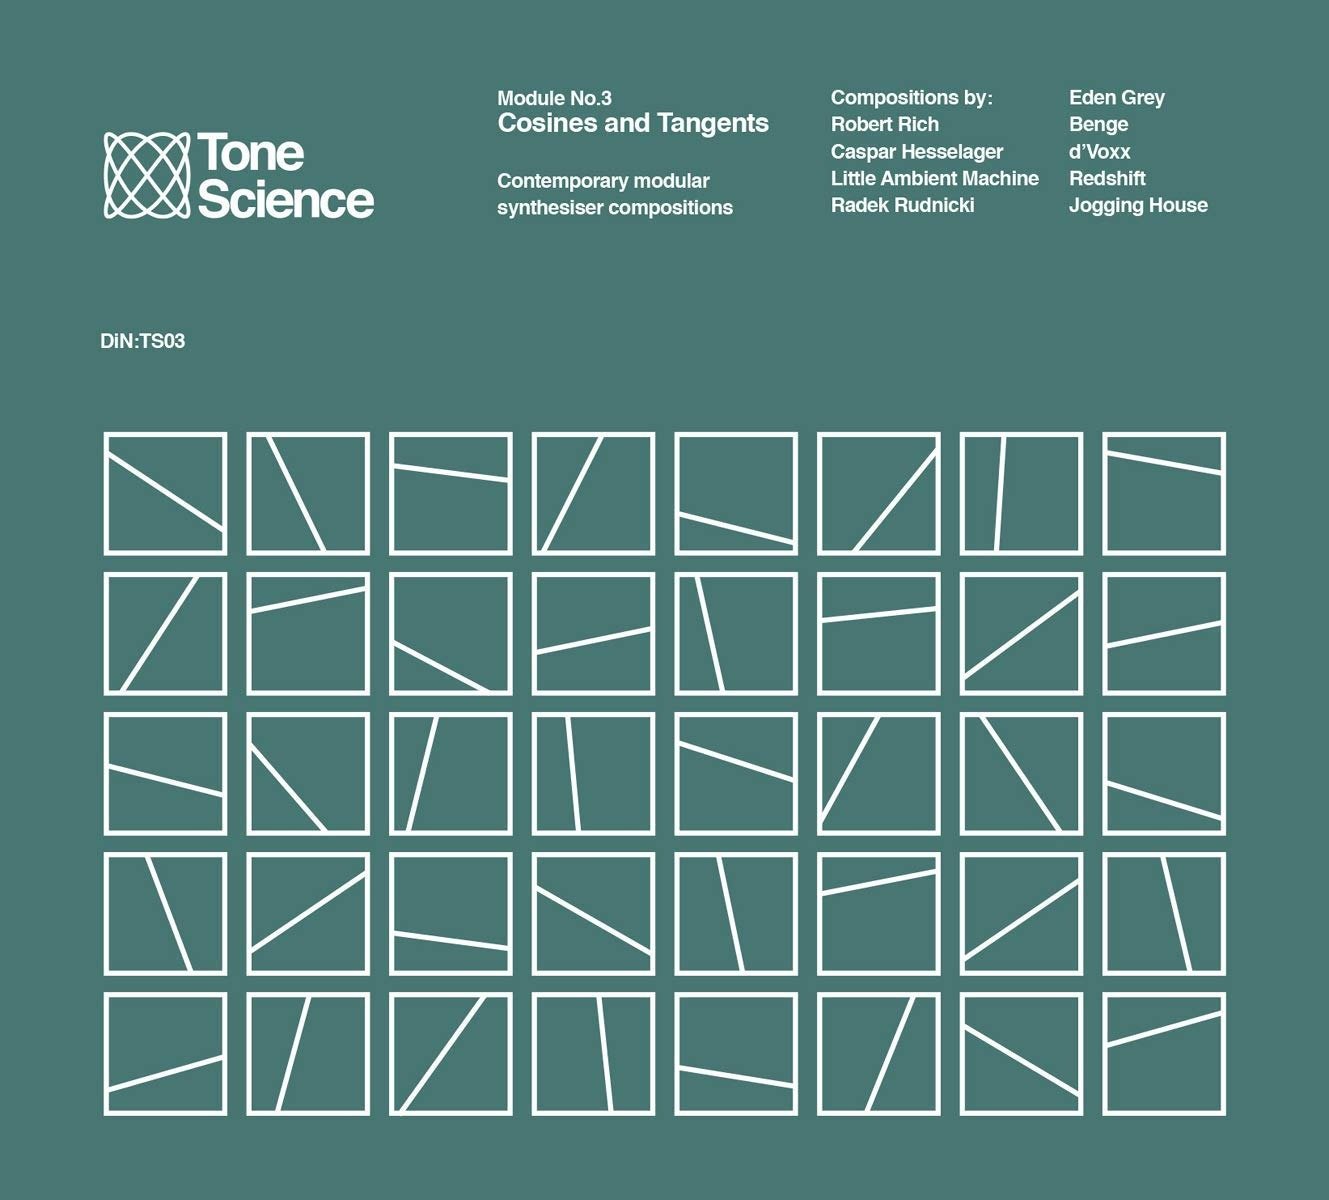 CD Shop - V/A TONE SCIENCE: MODULE NO.3 COSINES AND TANGENTS